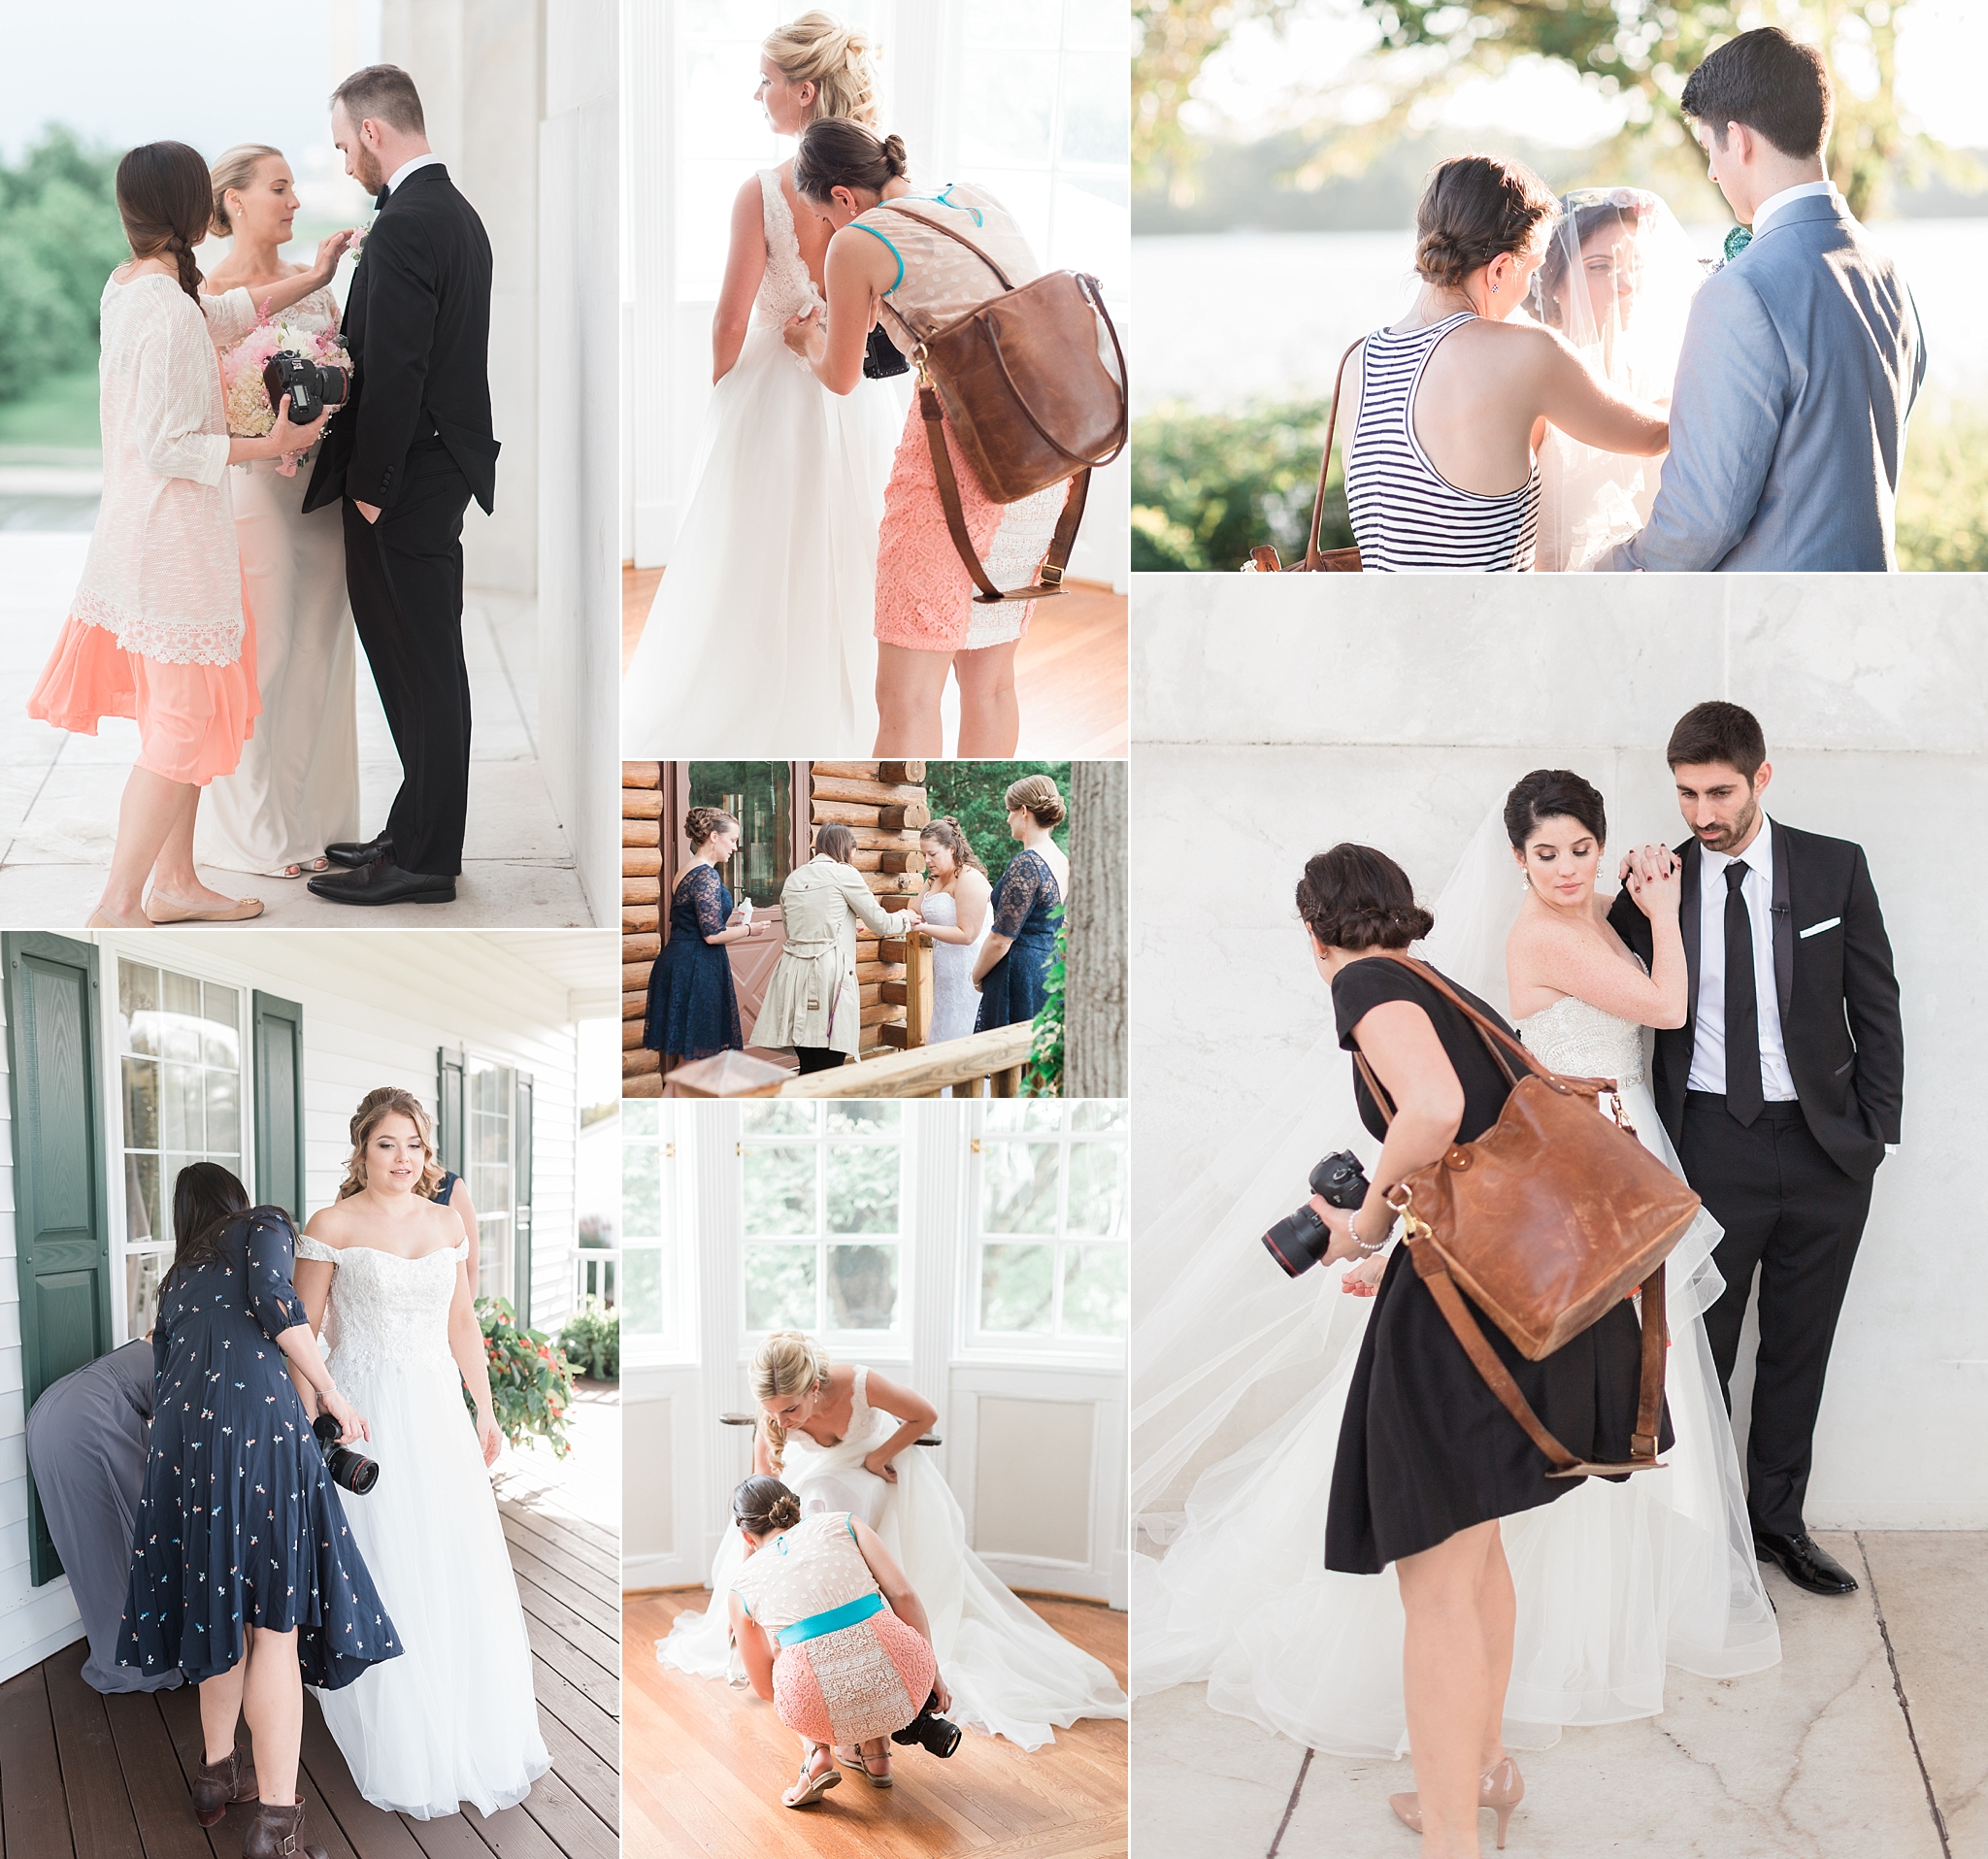 Go behind the scenes during the 2016 season with this Washington, DC wedding photographer to see all the fun that takes place on the big day!